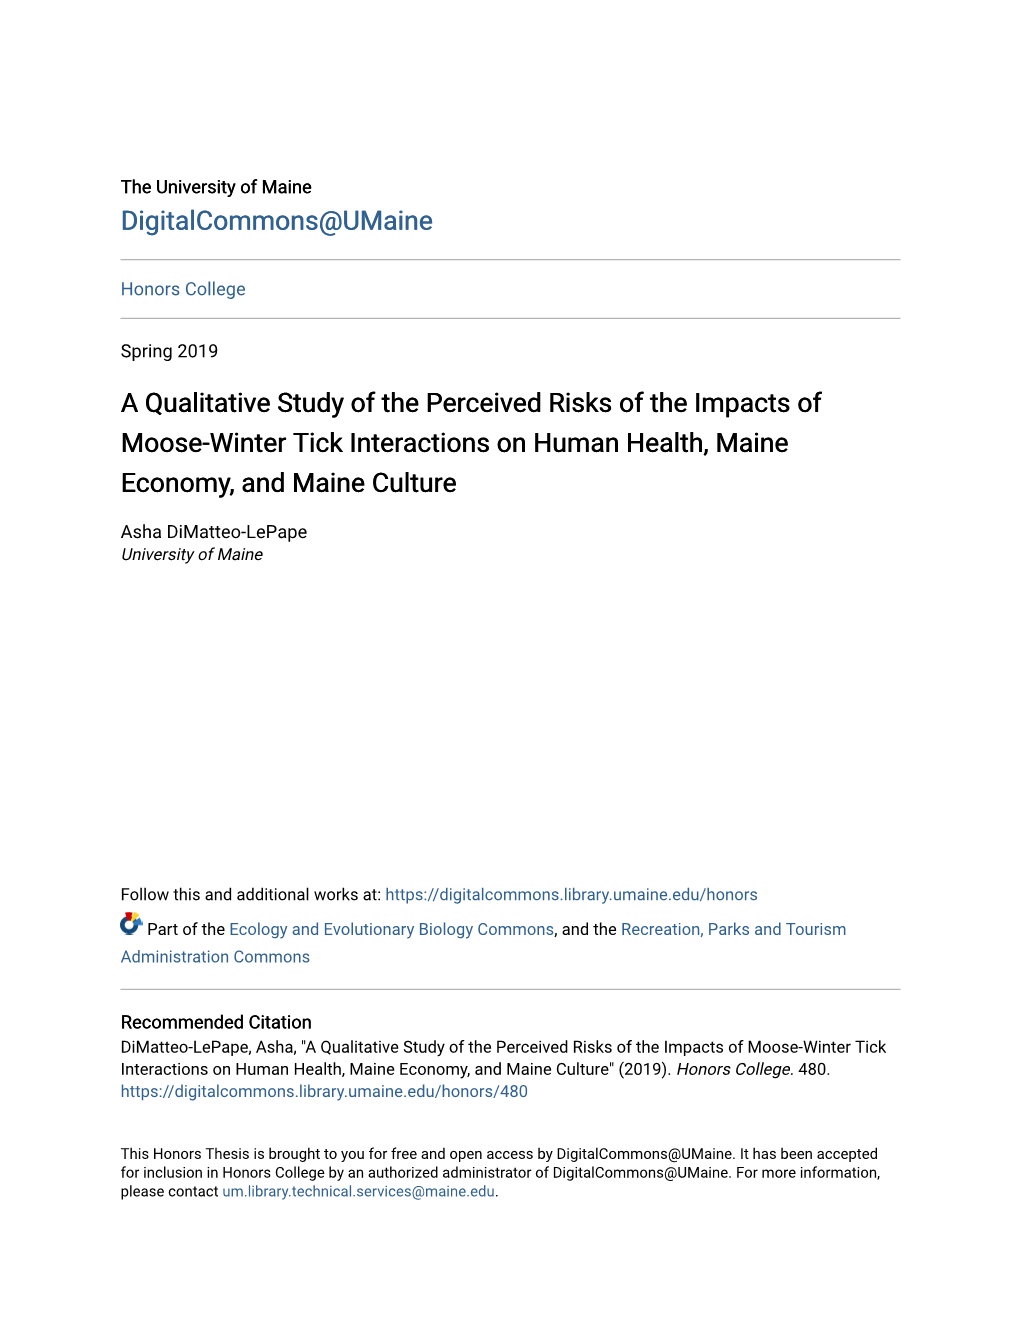 A Qualitative Study of the Perceived Risks of the Impacts of Moose-Winter Tick Interactions on Human Health, Maine Economy, and Maine Culture